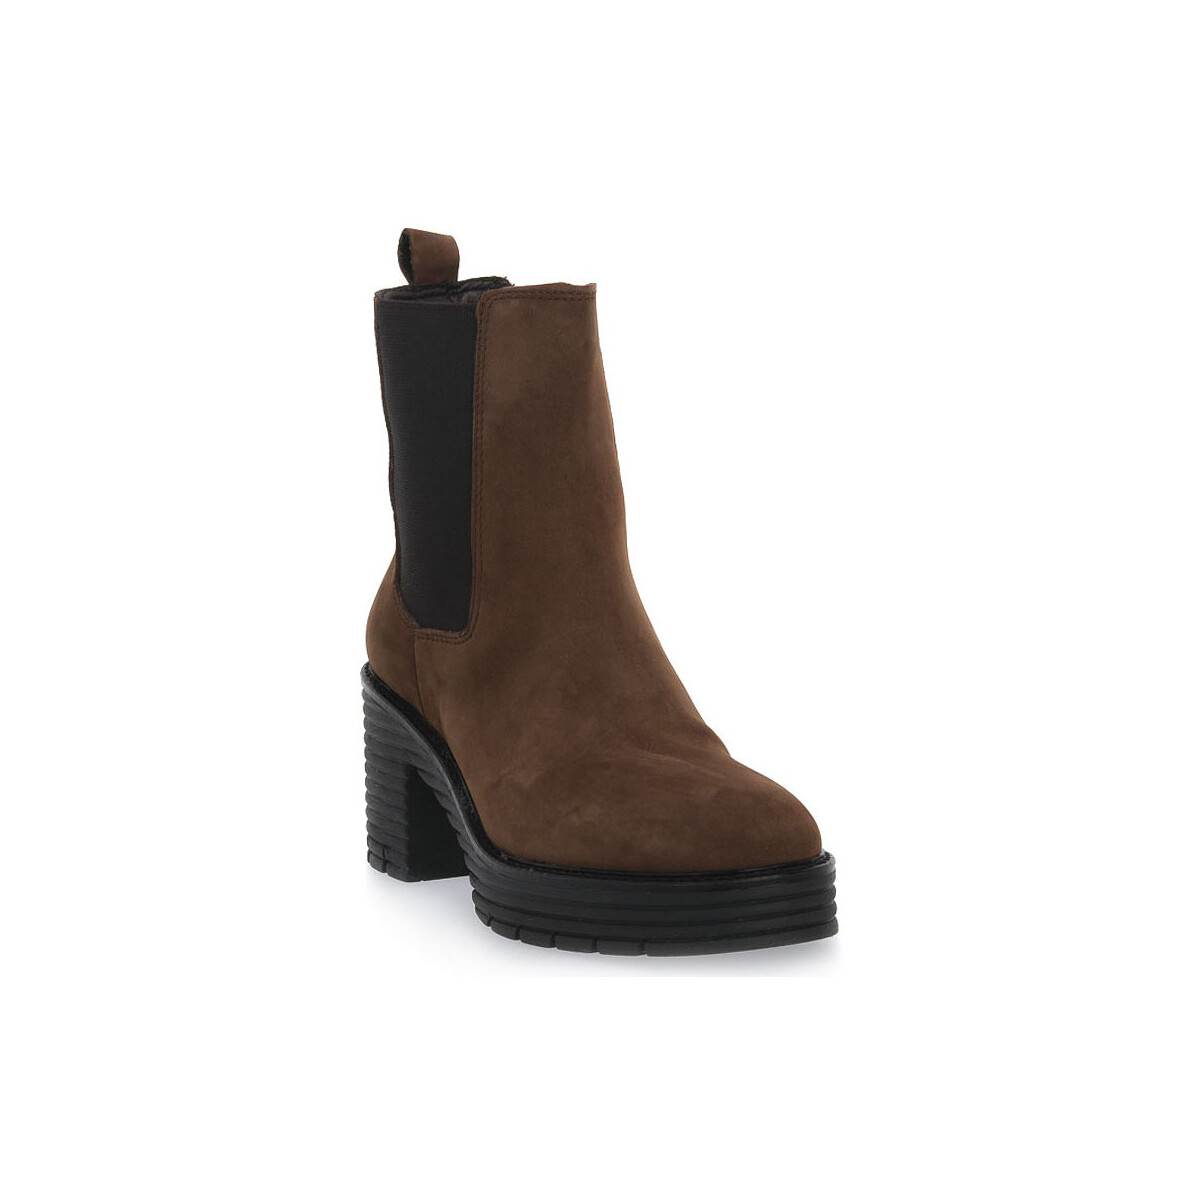 Zapatos Mujer Low boots Priv Lab KHLOE Negro